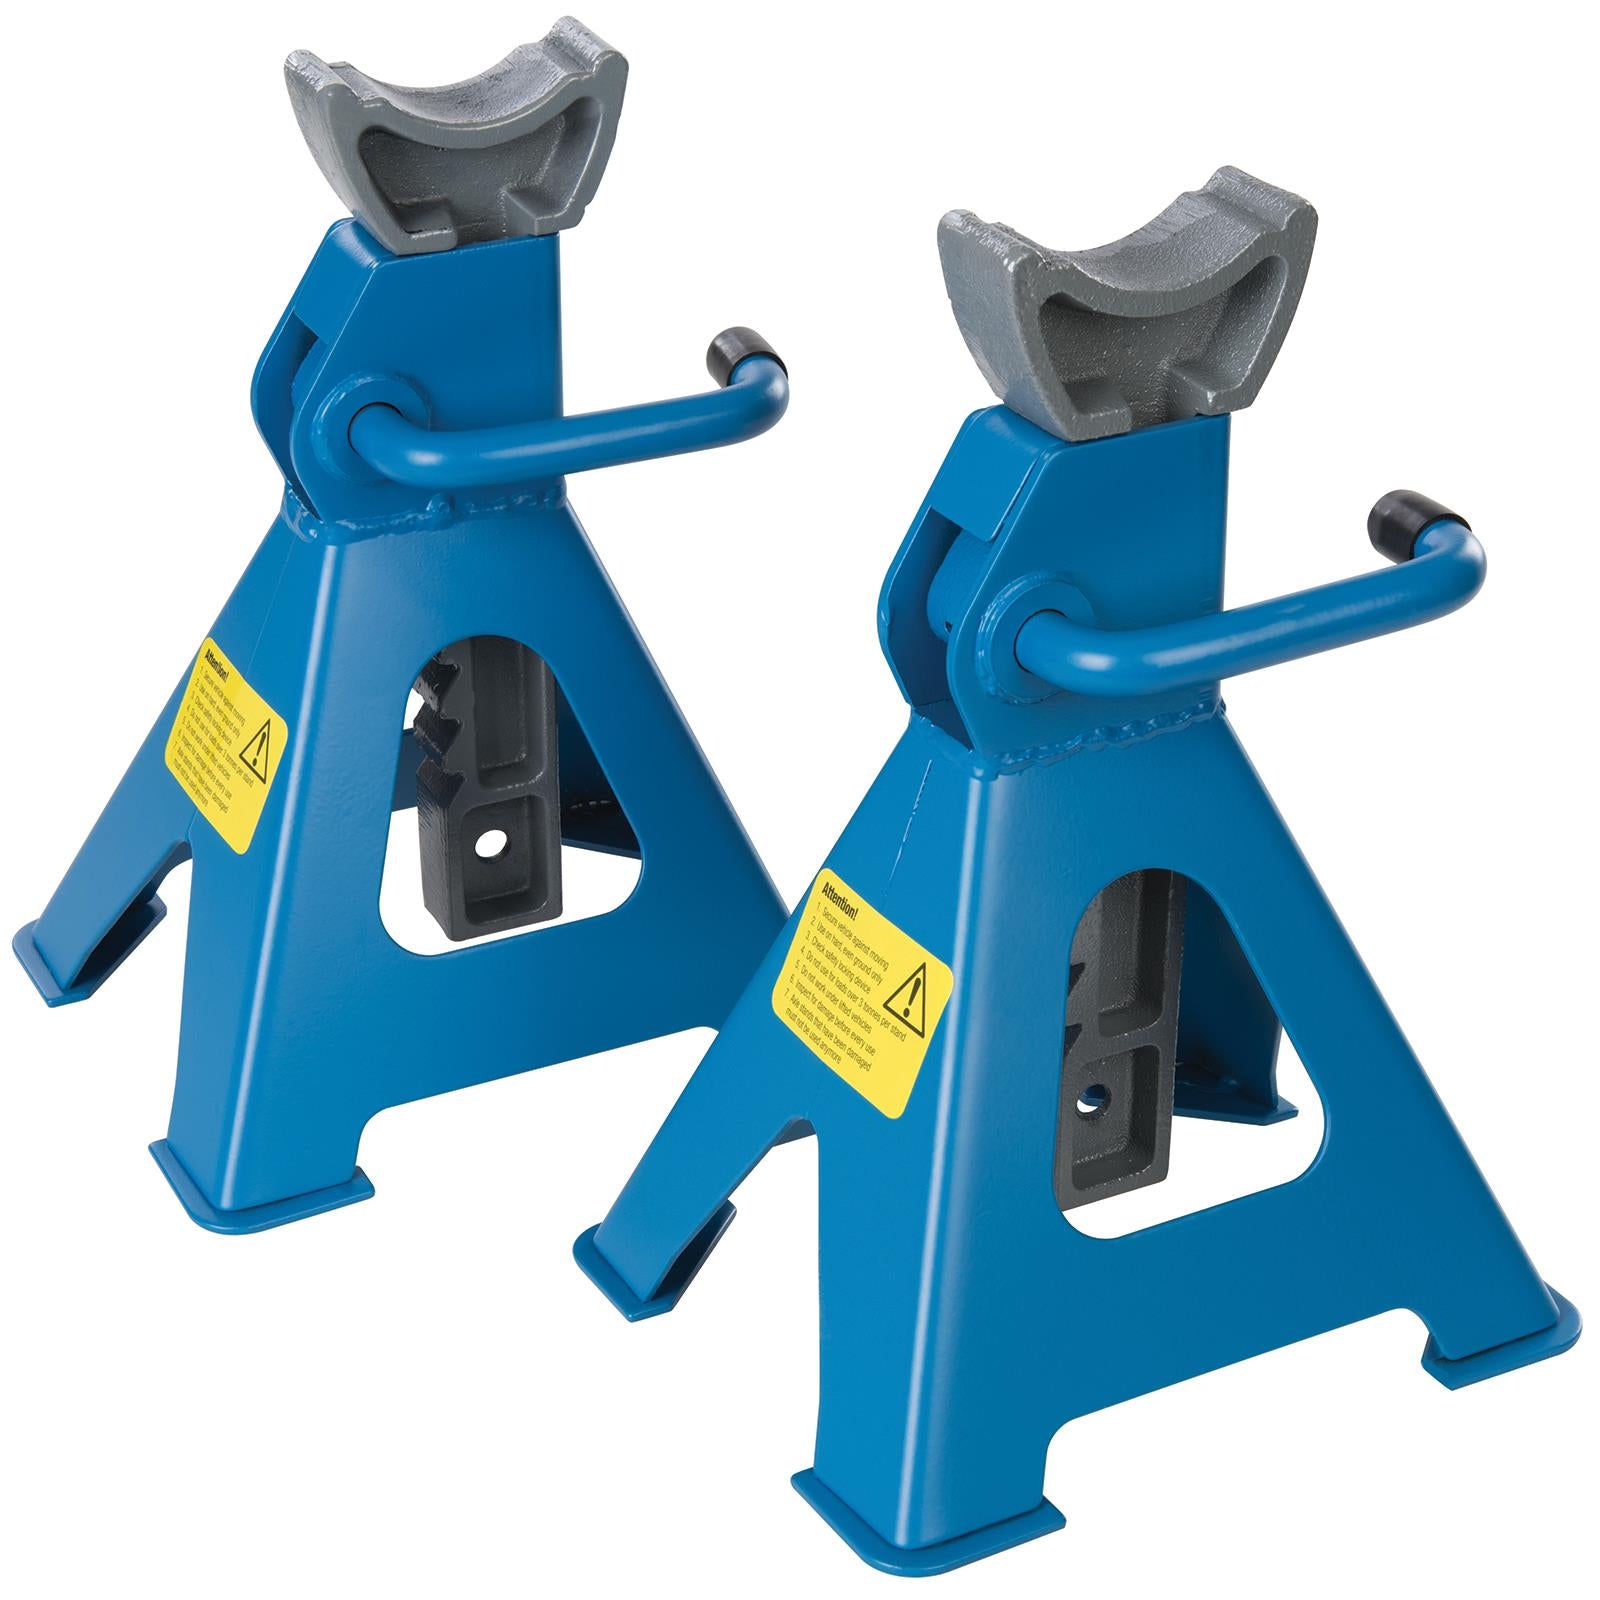 Silverline Axle Stand Set 2 Piece 3 Tonne Lifting Capacity